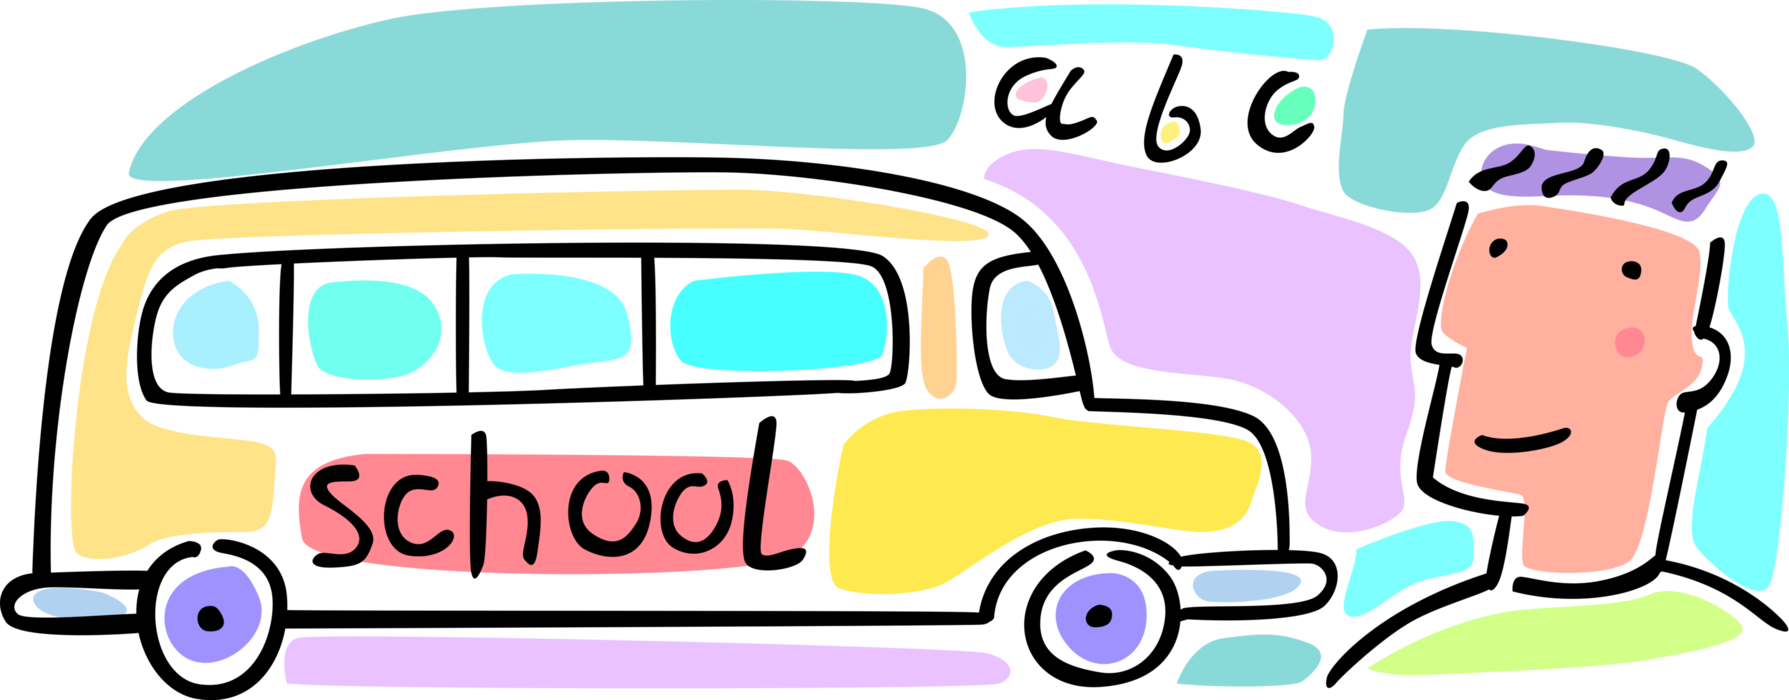 Vector Illustration of Schoolbus or School Bus used for Student Transport To and From School